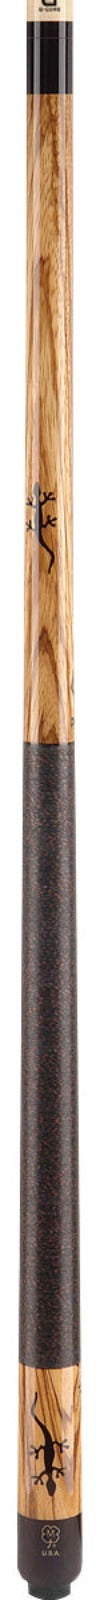 McDermott M54A Pool Cue with G-Core Shaft -McDermott